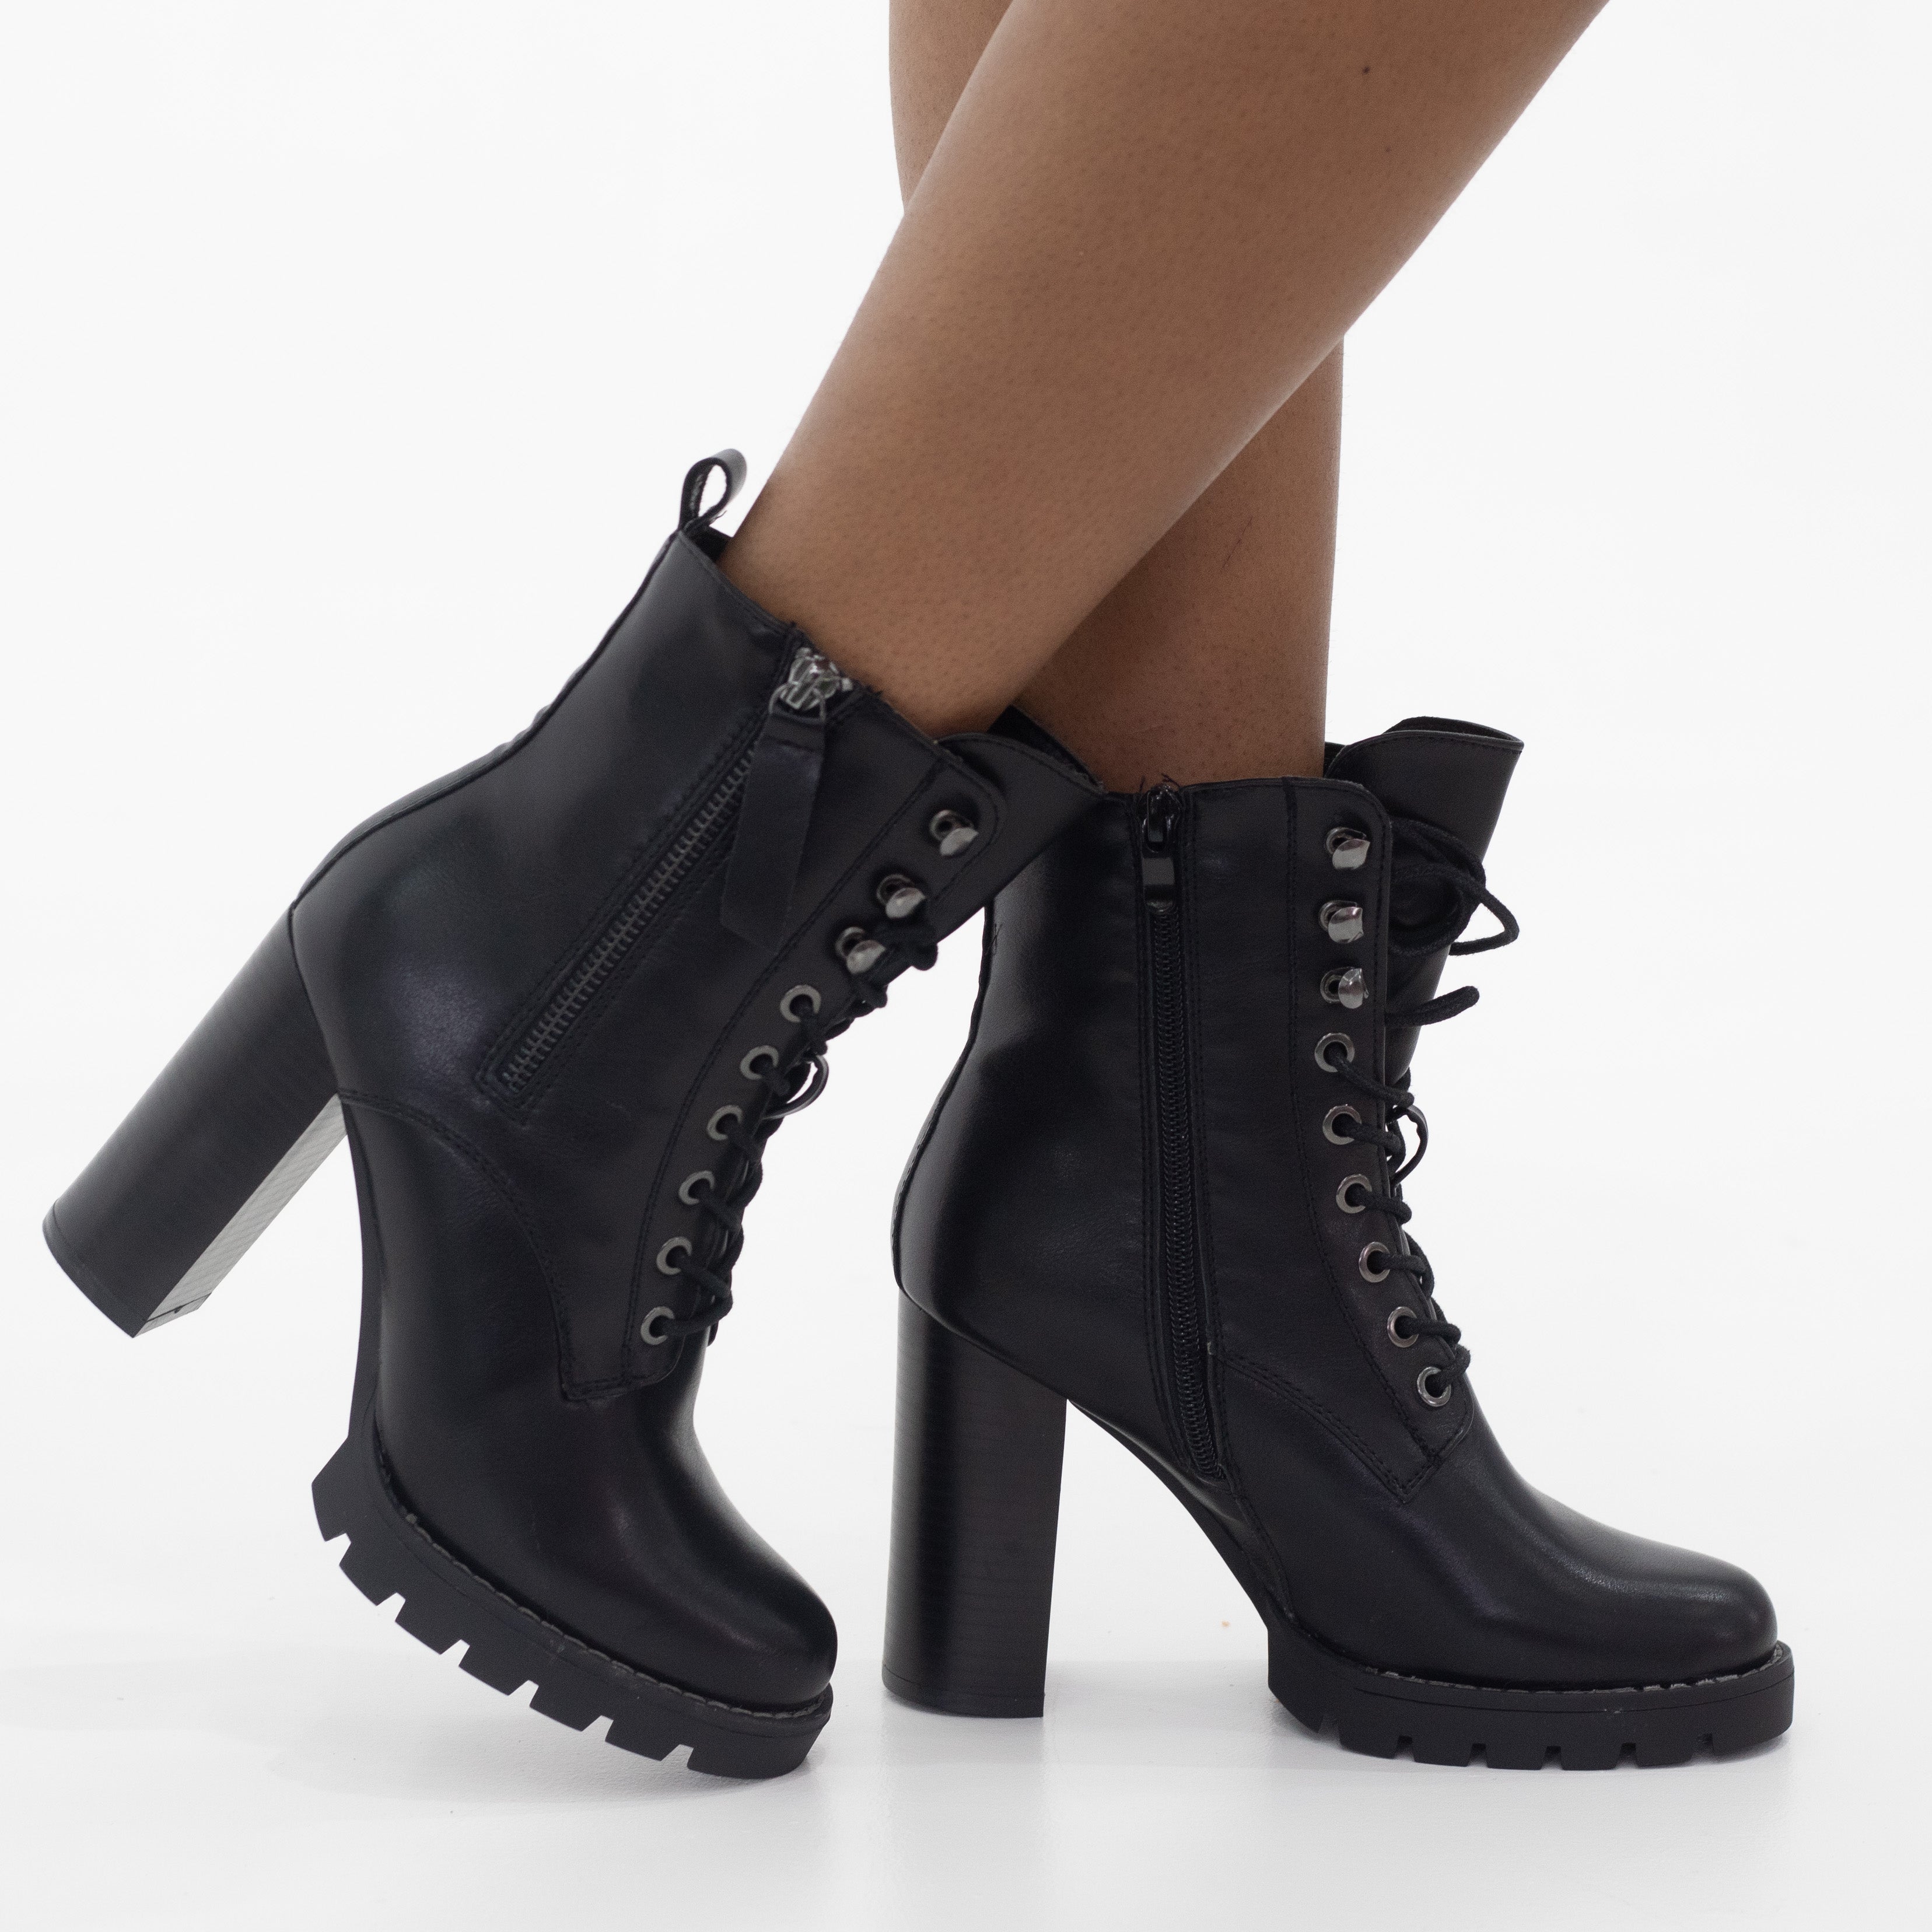 Black 10cm heel lace up ankle boot opposite